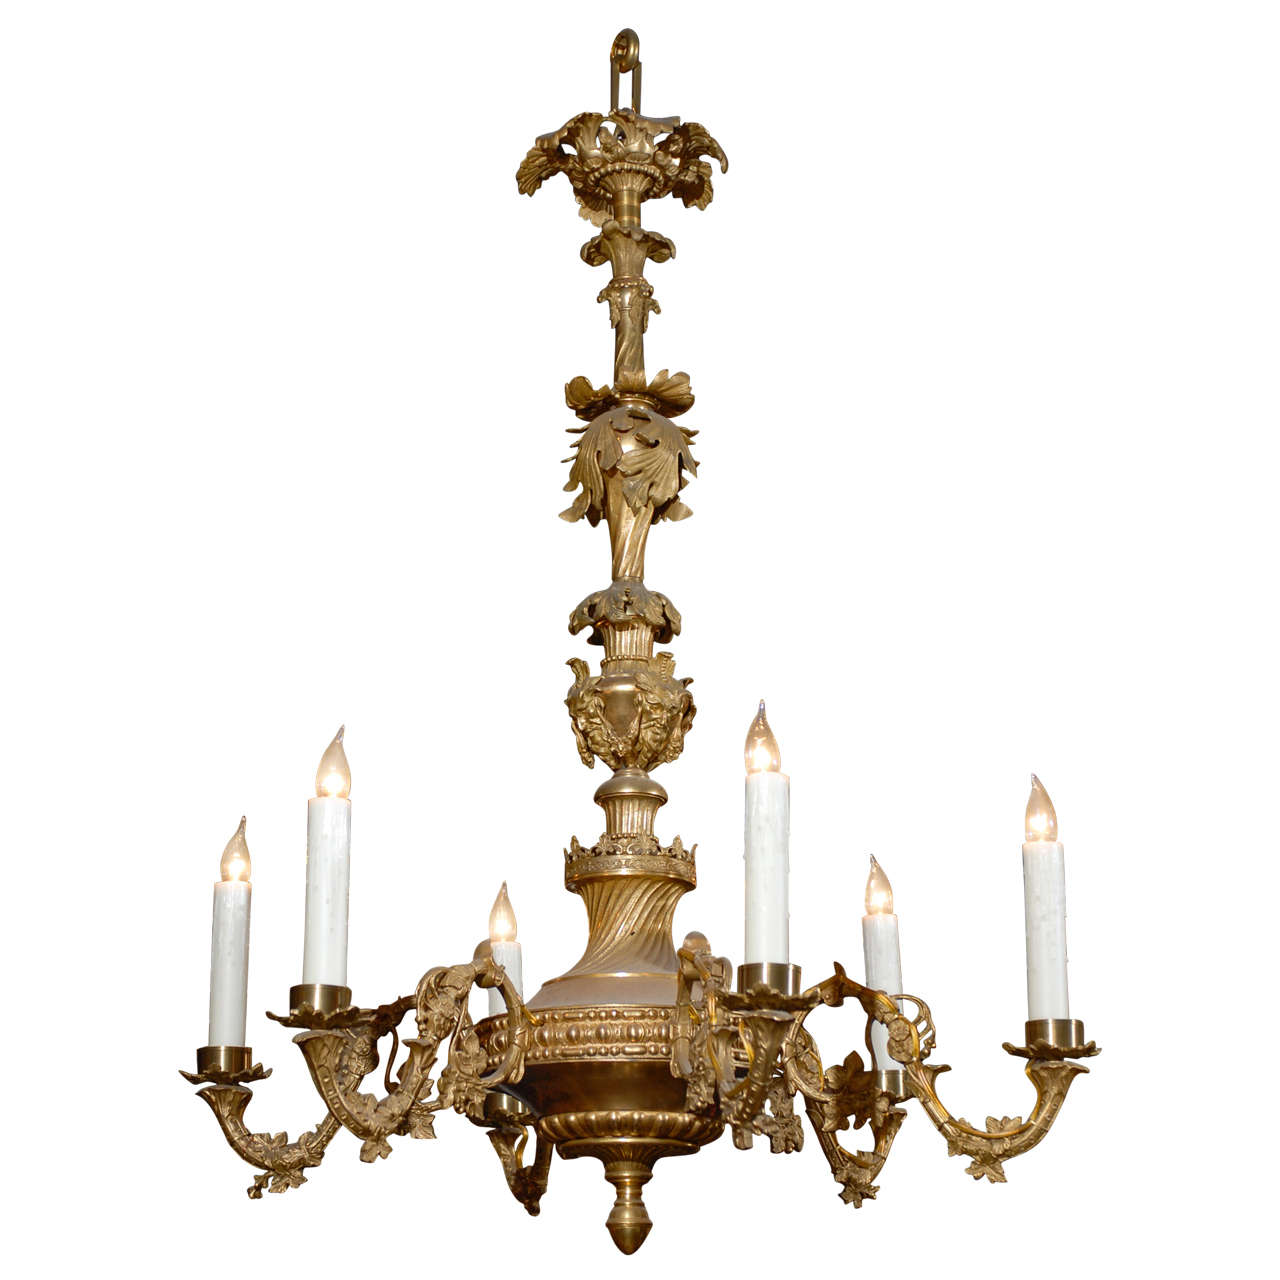 Early 20th C. English Gilt Brass Chandelier For Sale